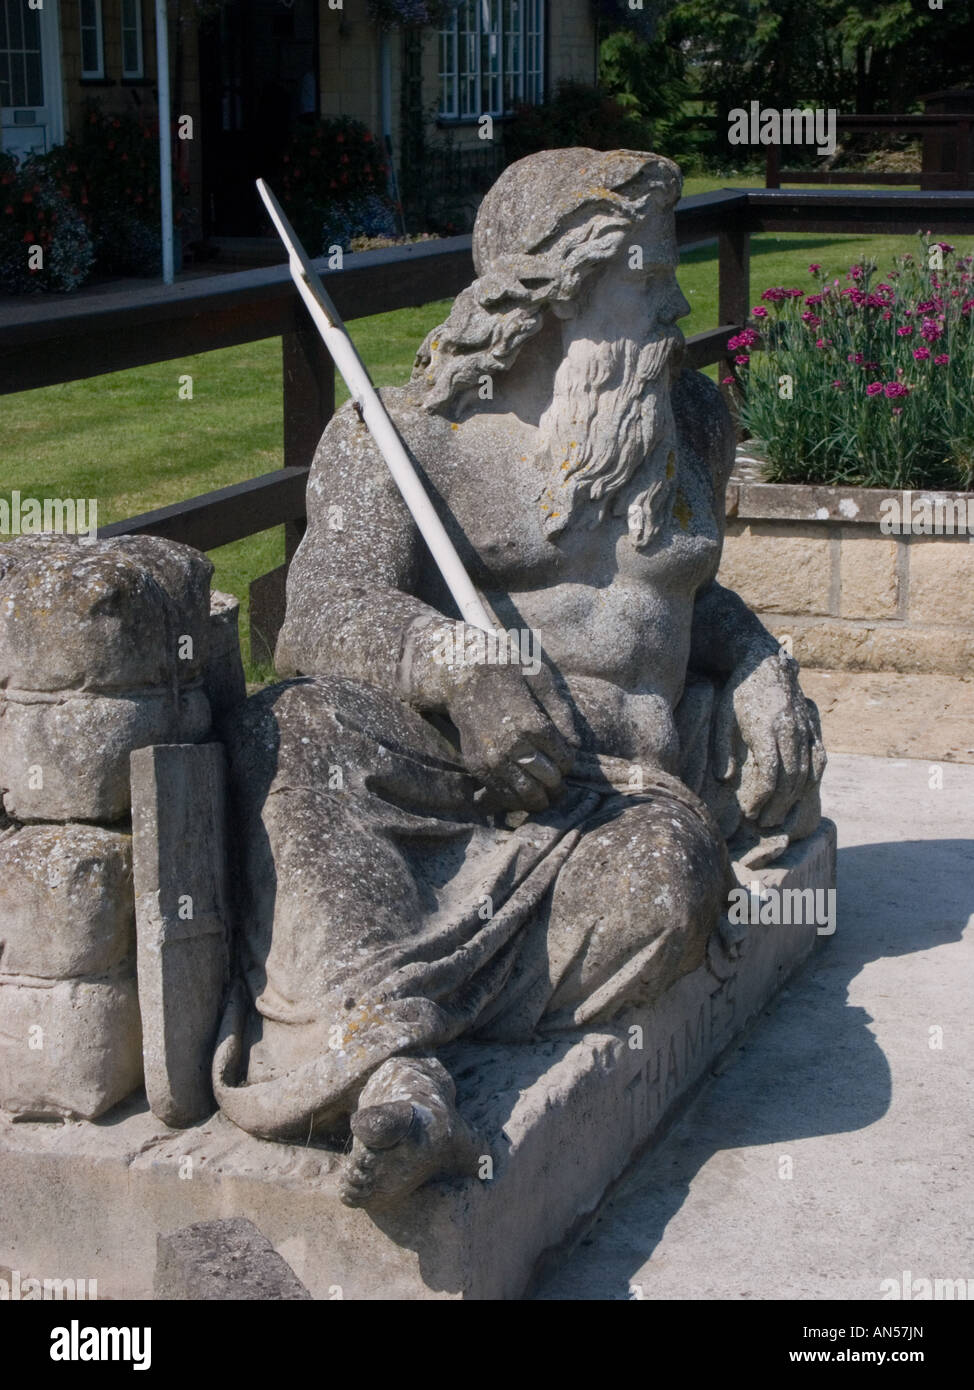 Statue of 'Old Father Thames' based on Neptune at St John's Lock, the highest lock on the River Thames at Lechlade-on-Thames Stock Photo